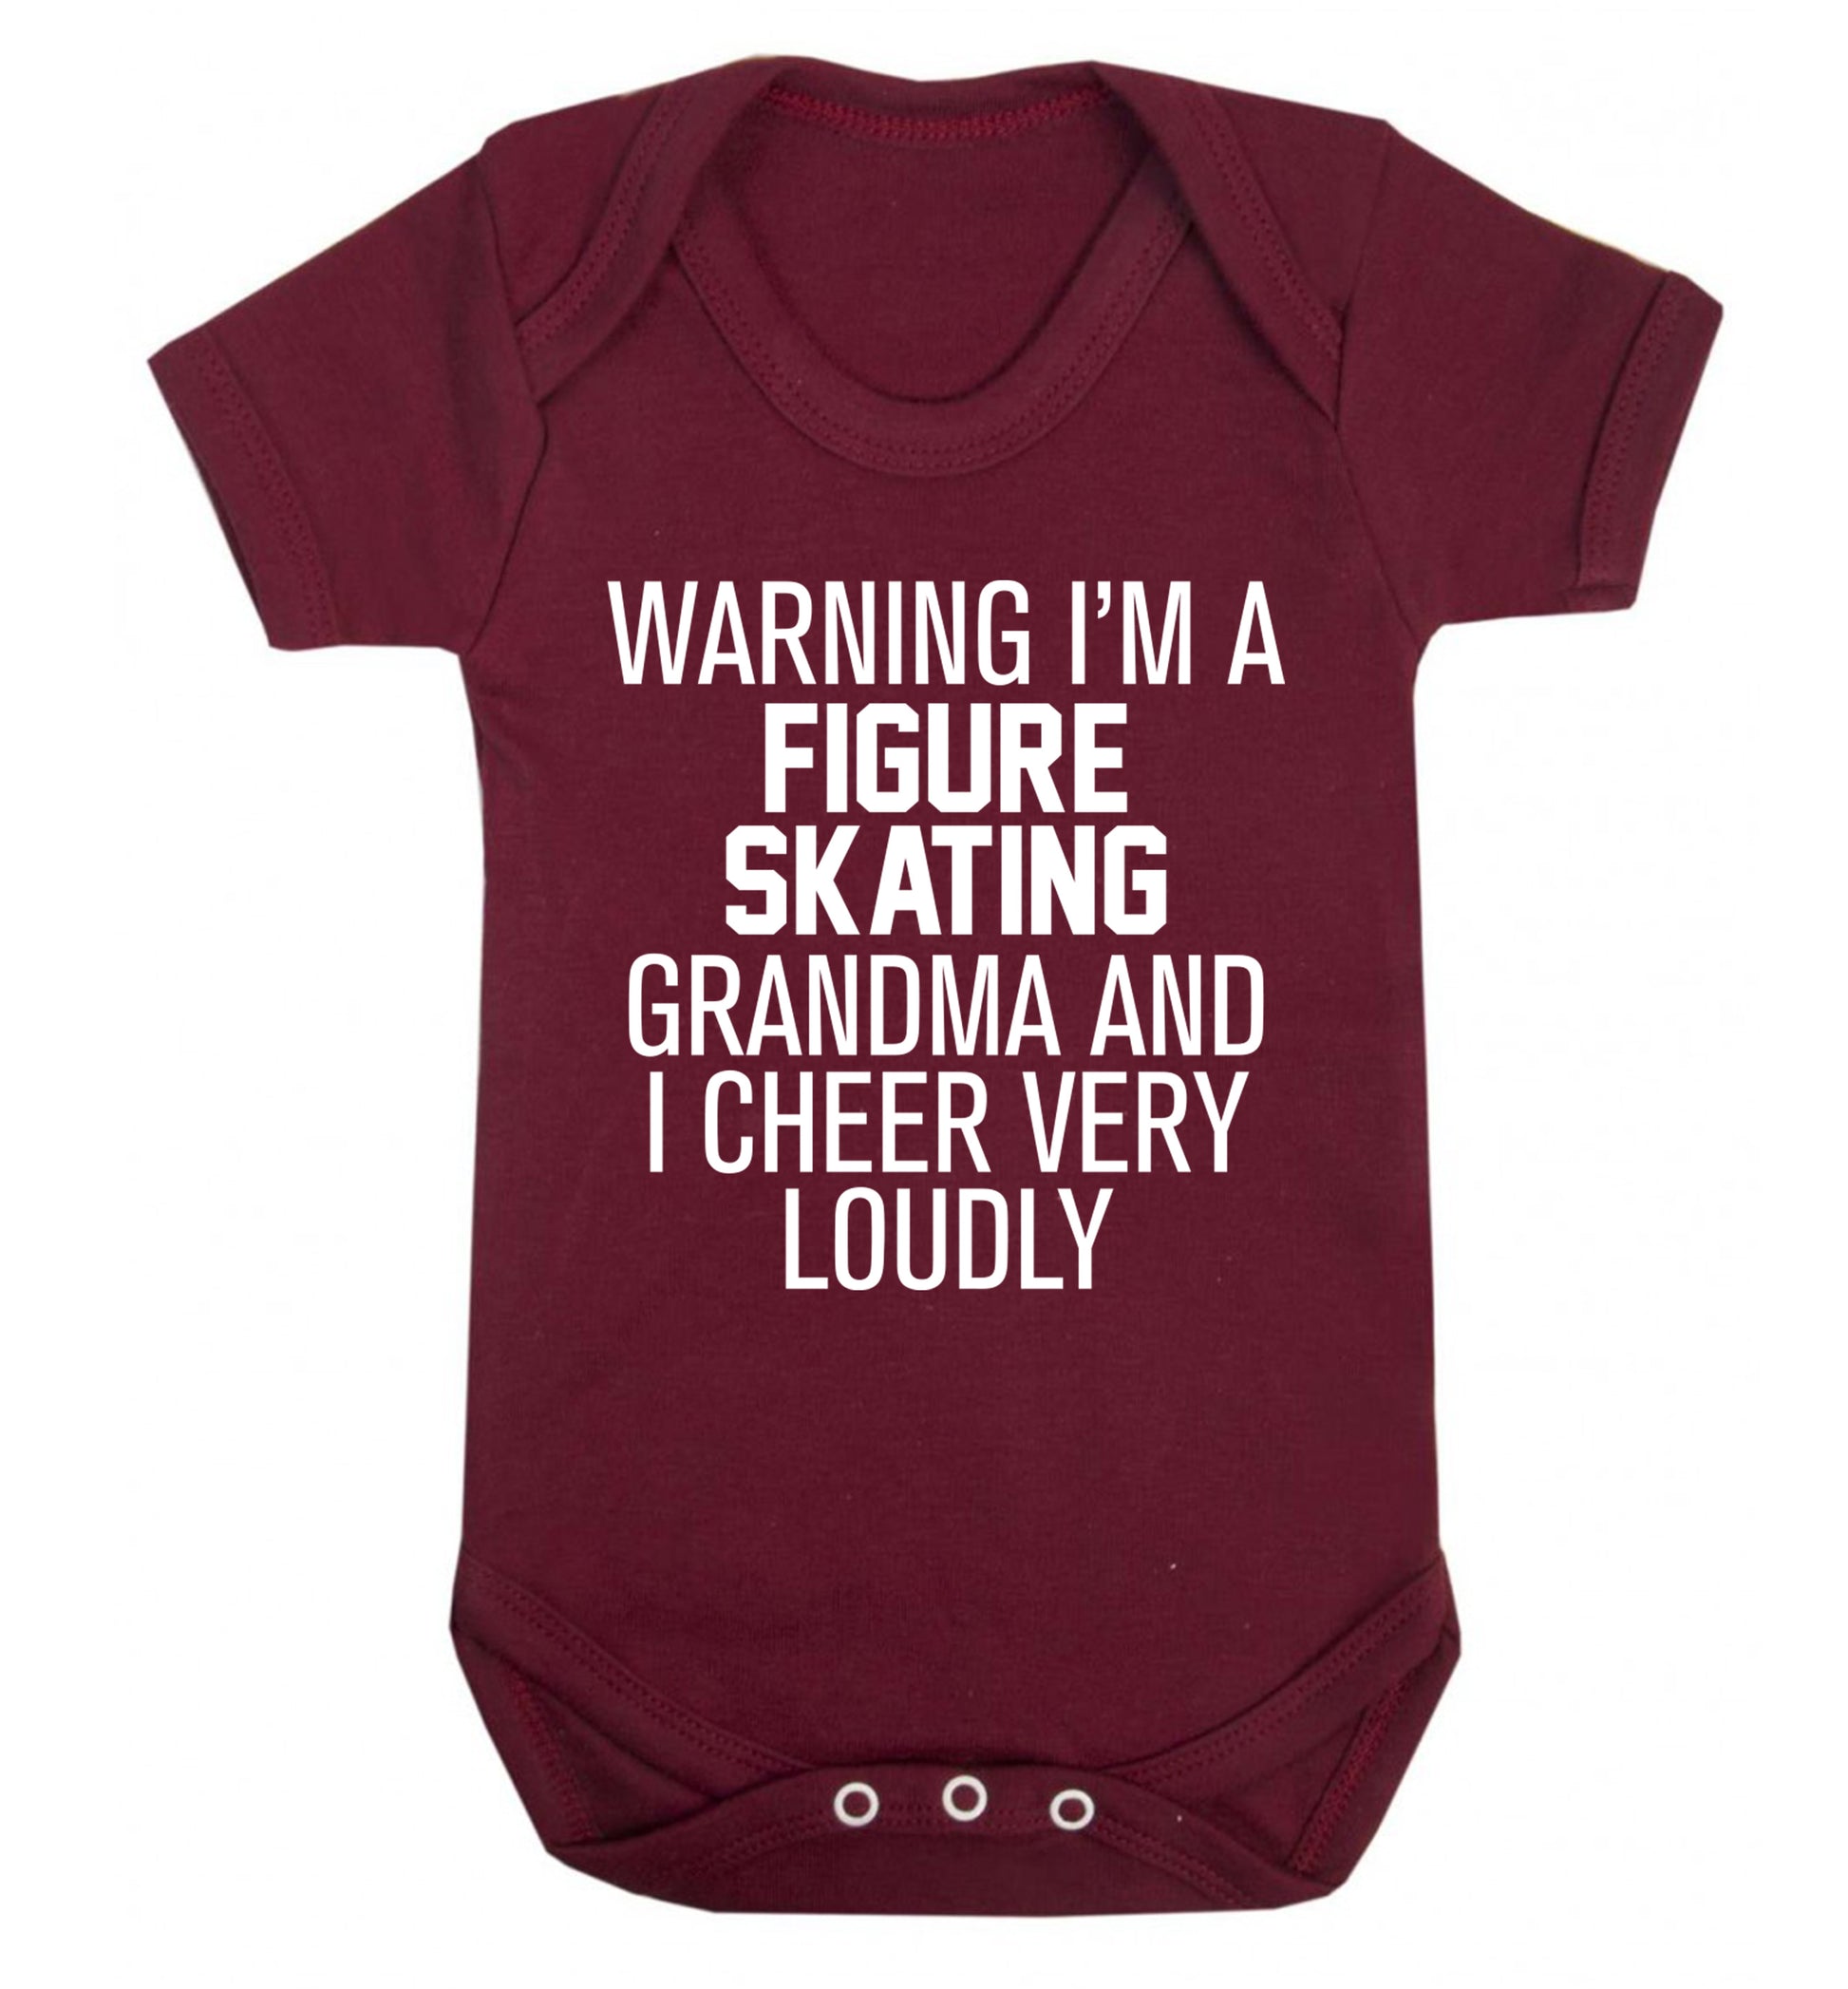 Warning I'm a figure skating grandma and I cheer very loudly Baby Vest maroon 18-24 months